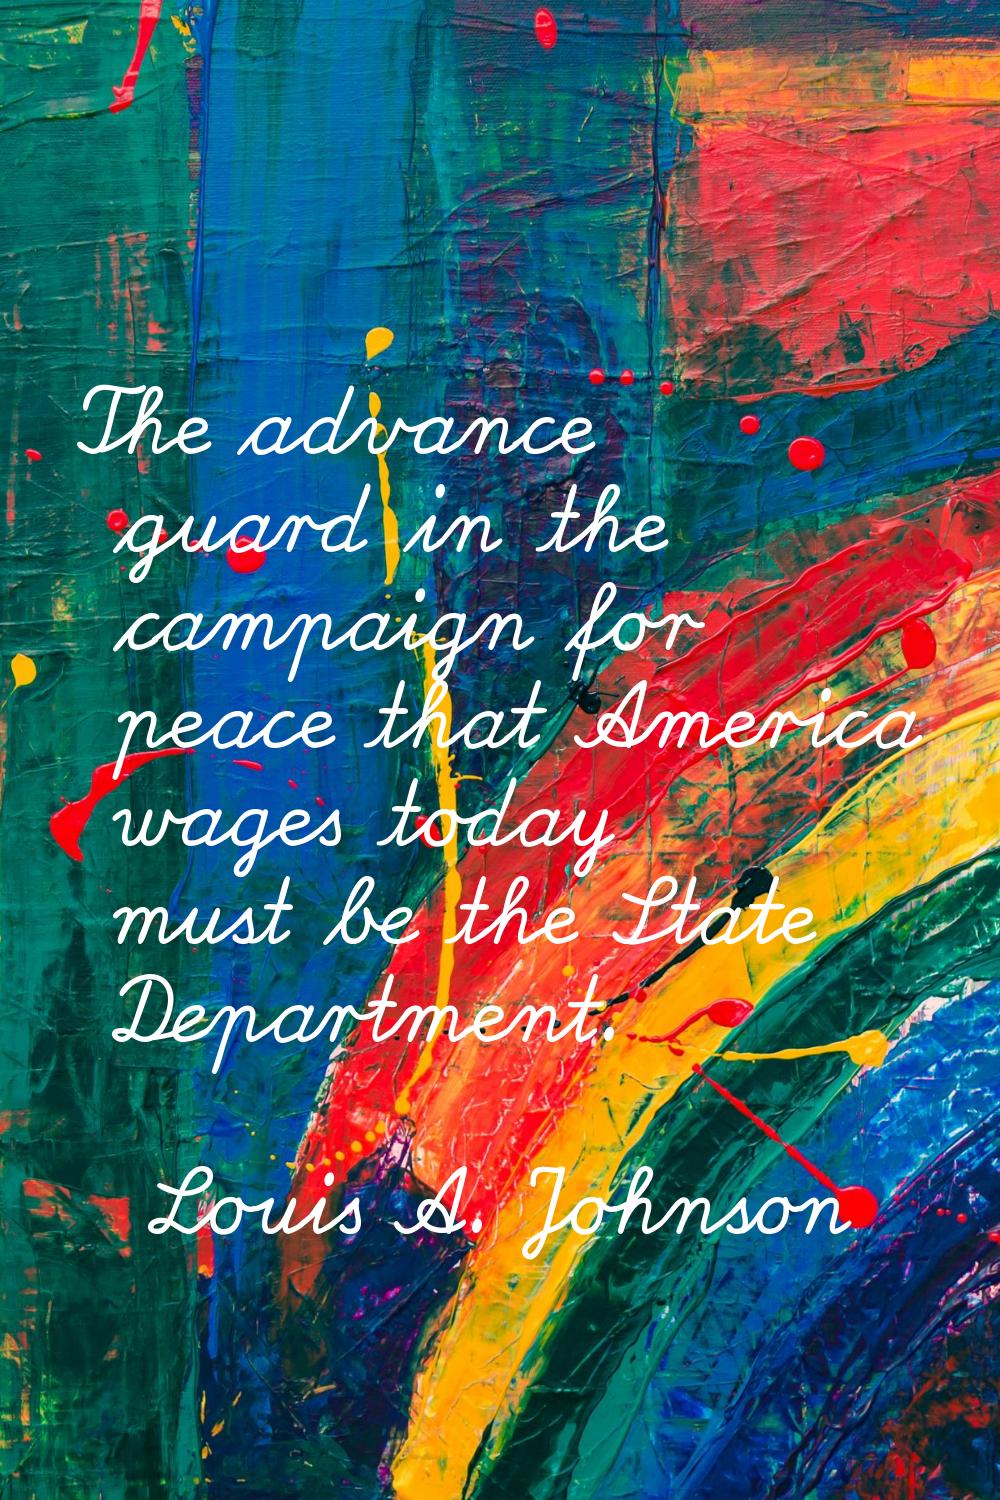 The advance guard in the campaign for peace that America wages today must be the State Department.